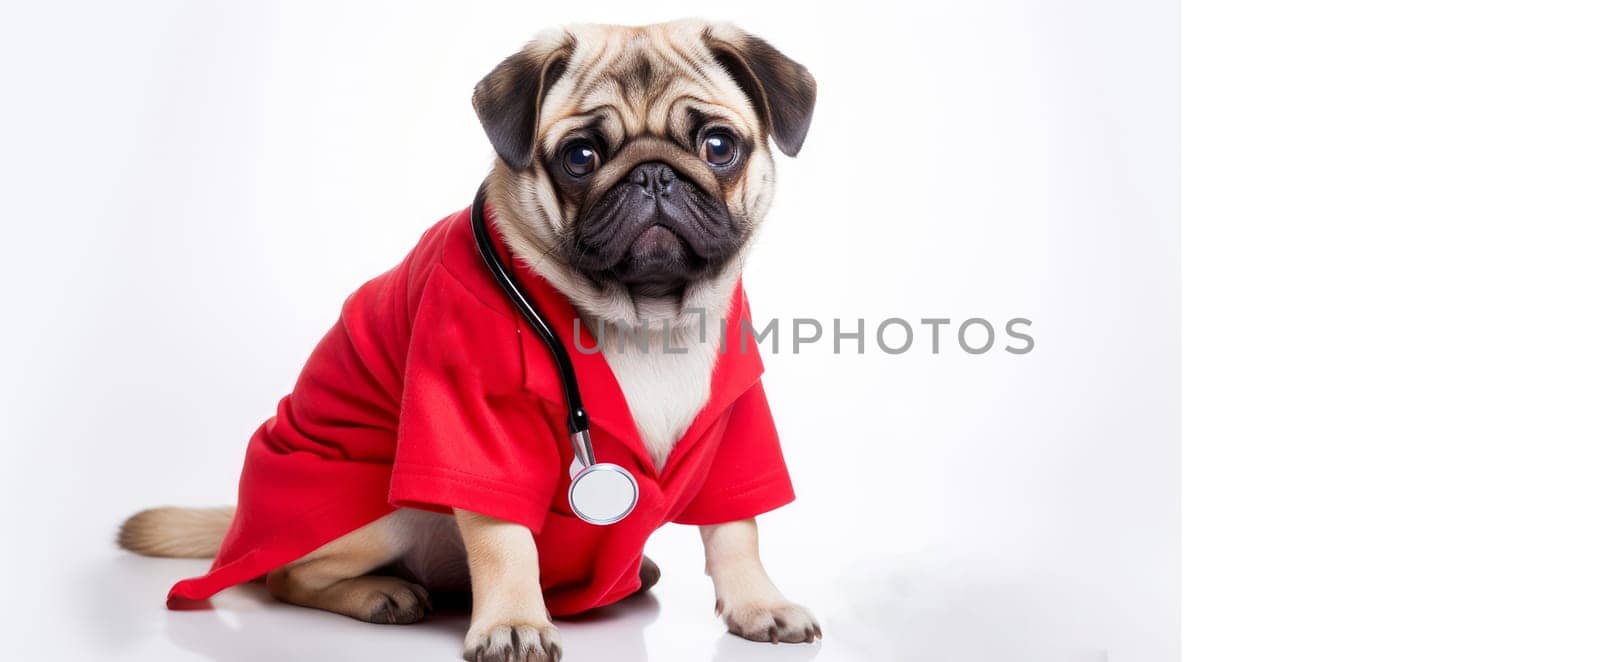 A dog with glasses, with a stethoscope in a red jacket and a doctor's suit against the white background. Pet care and grooming concept.